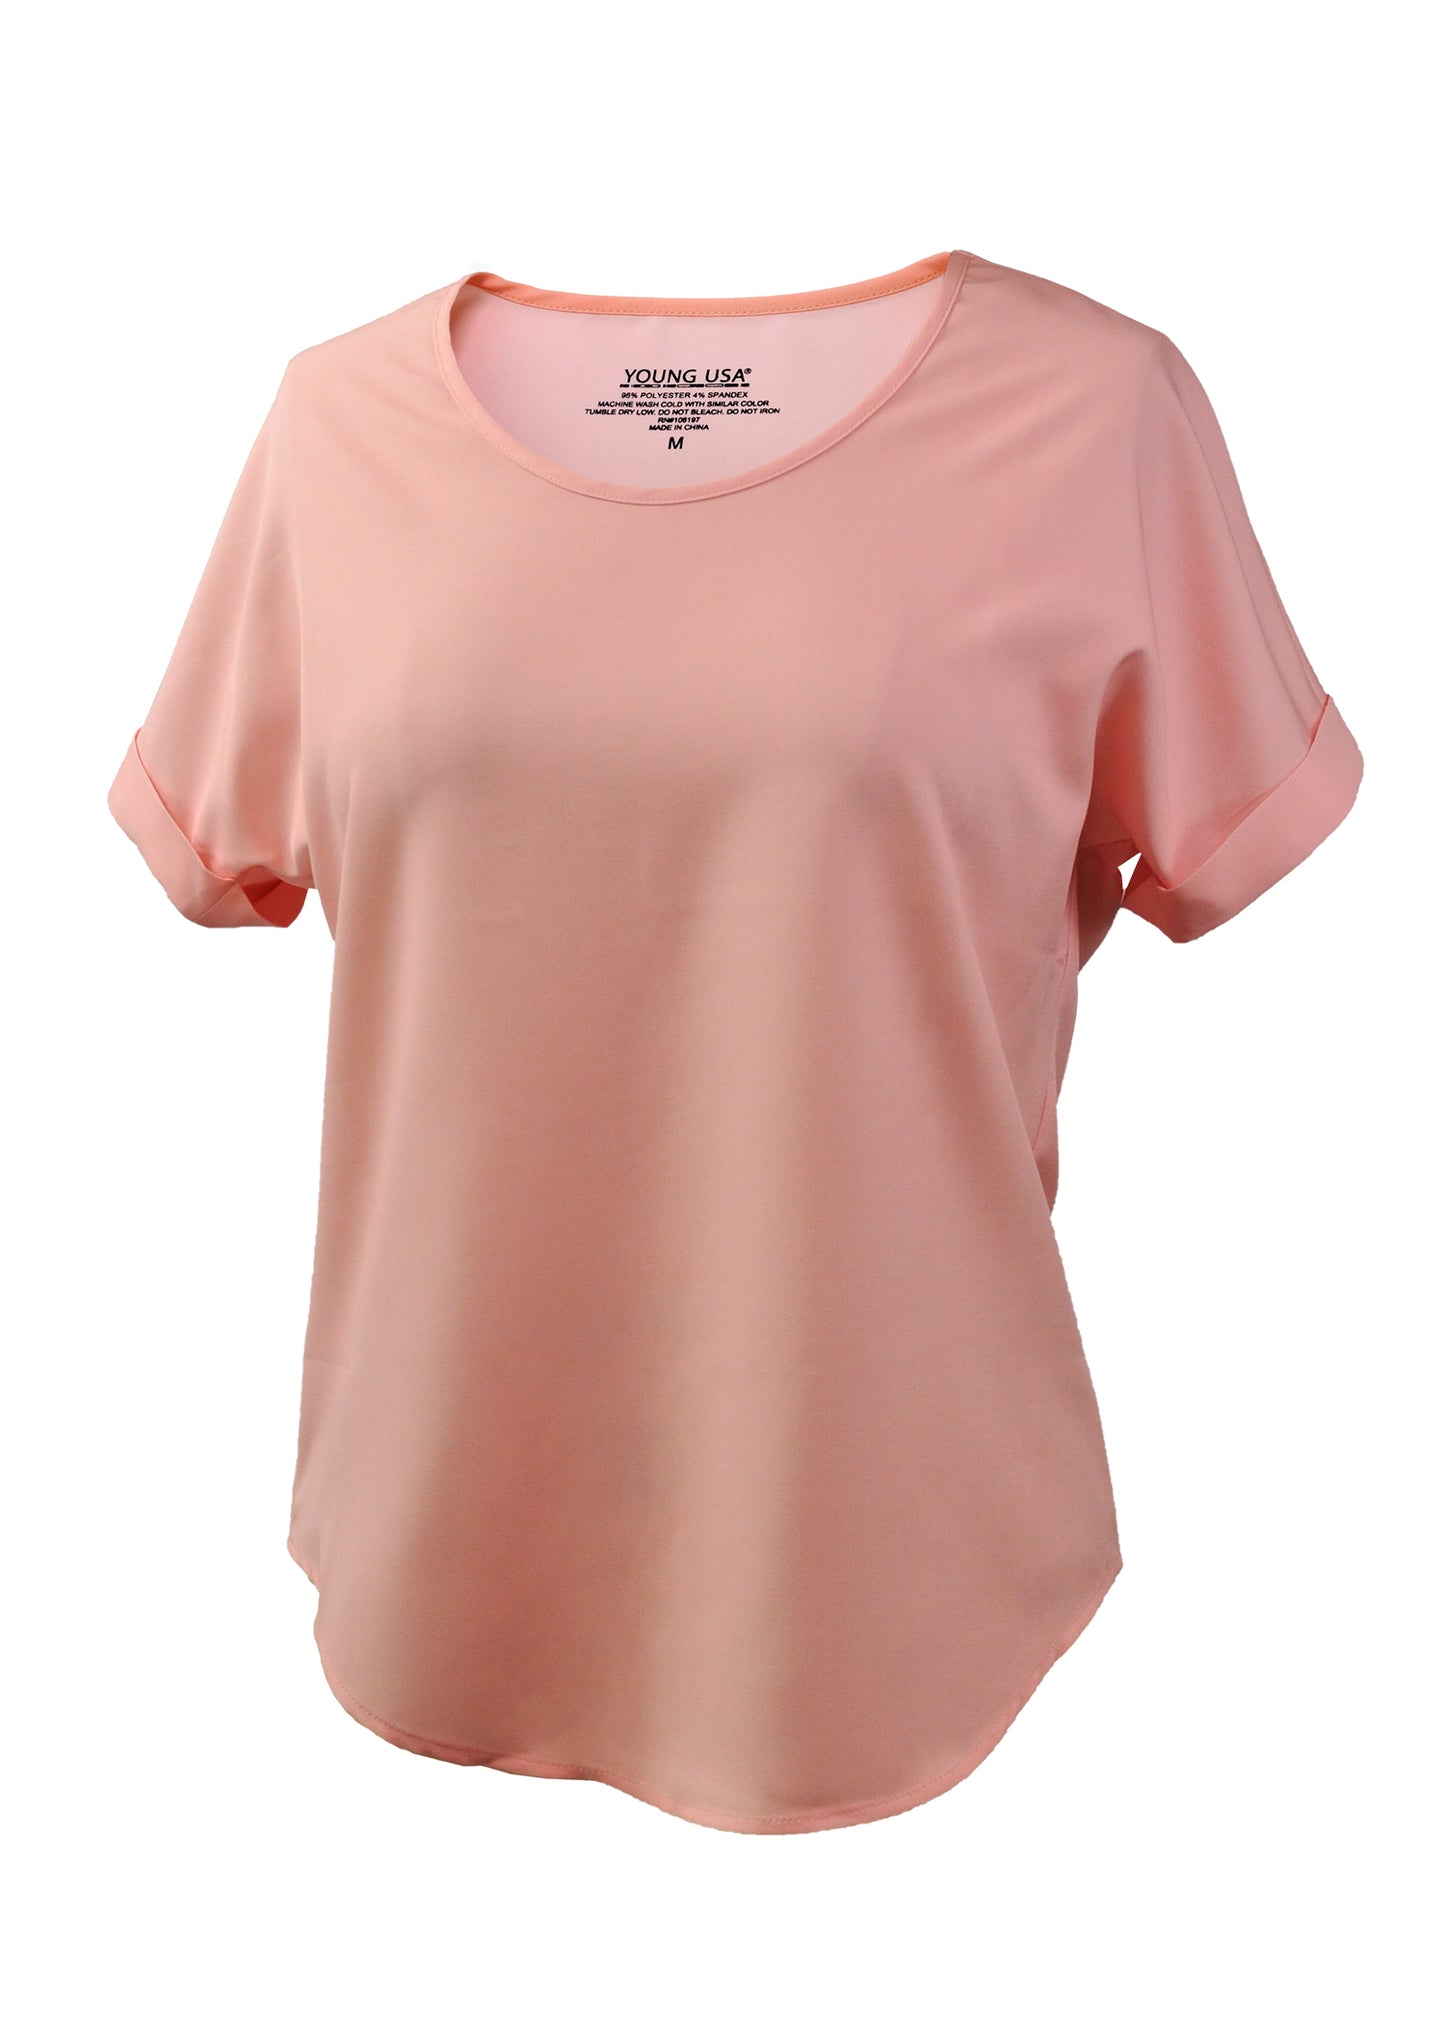 Young USA Ladies Fashion Blouse in Front - Pink